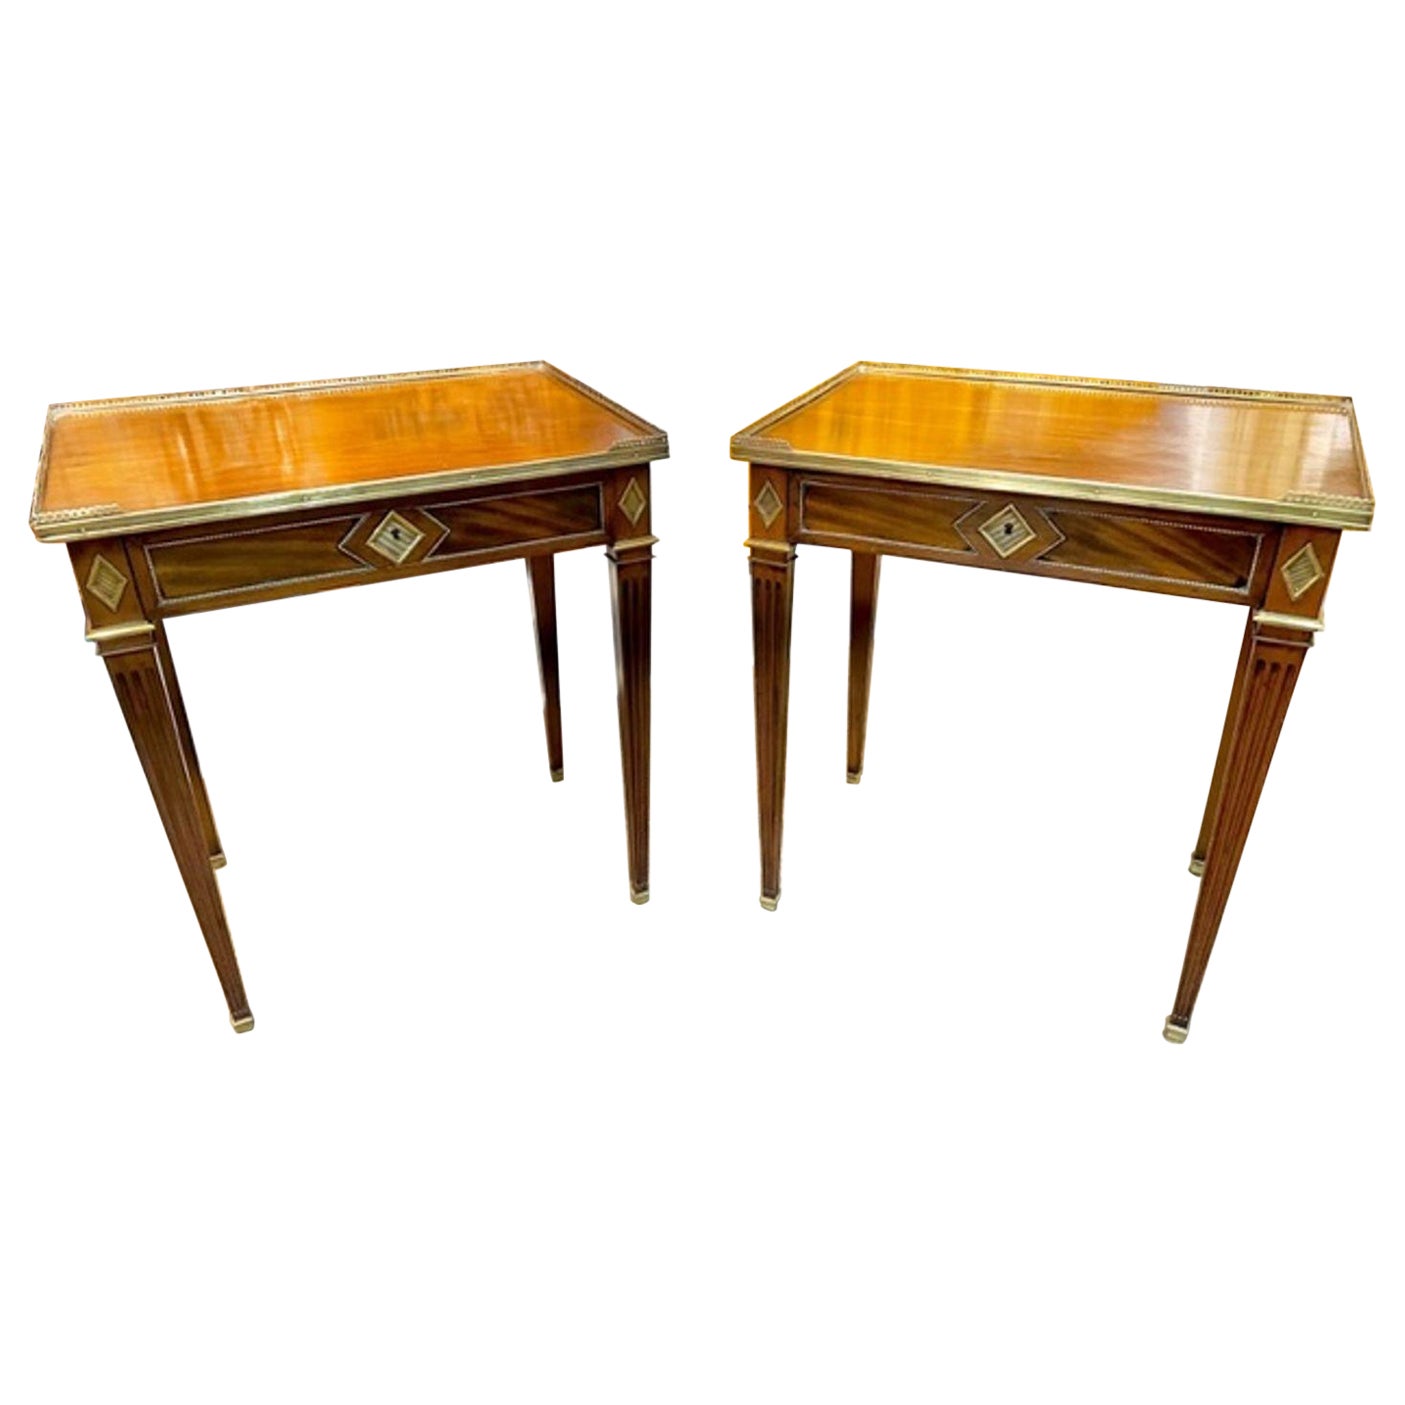 Pair of 19th Century Russian Mahogany Side Tables